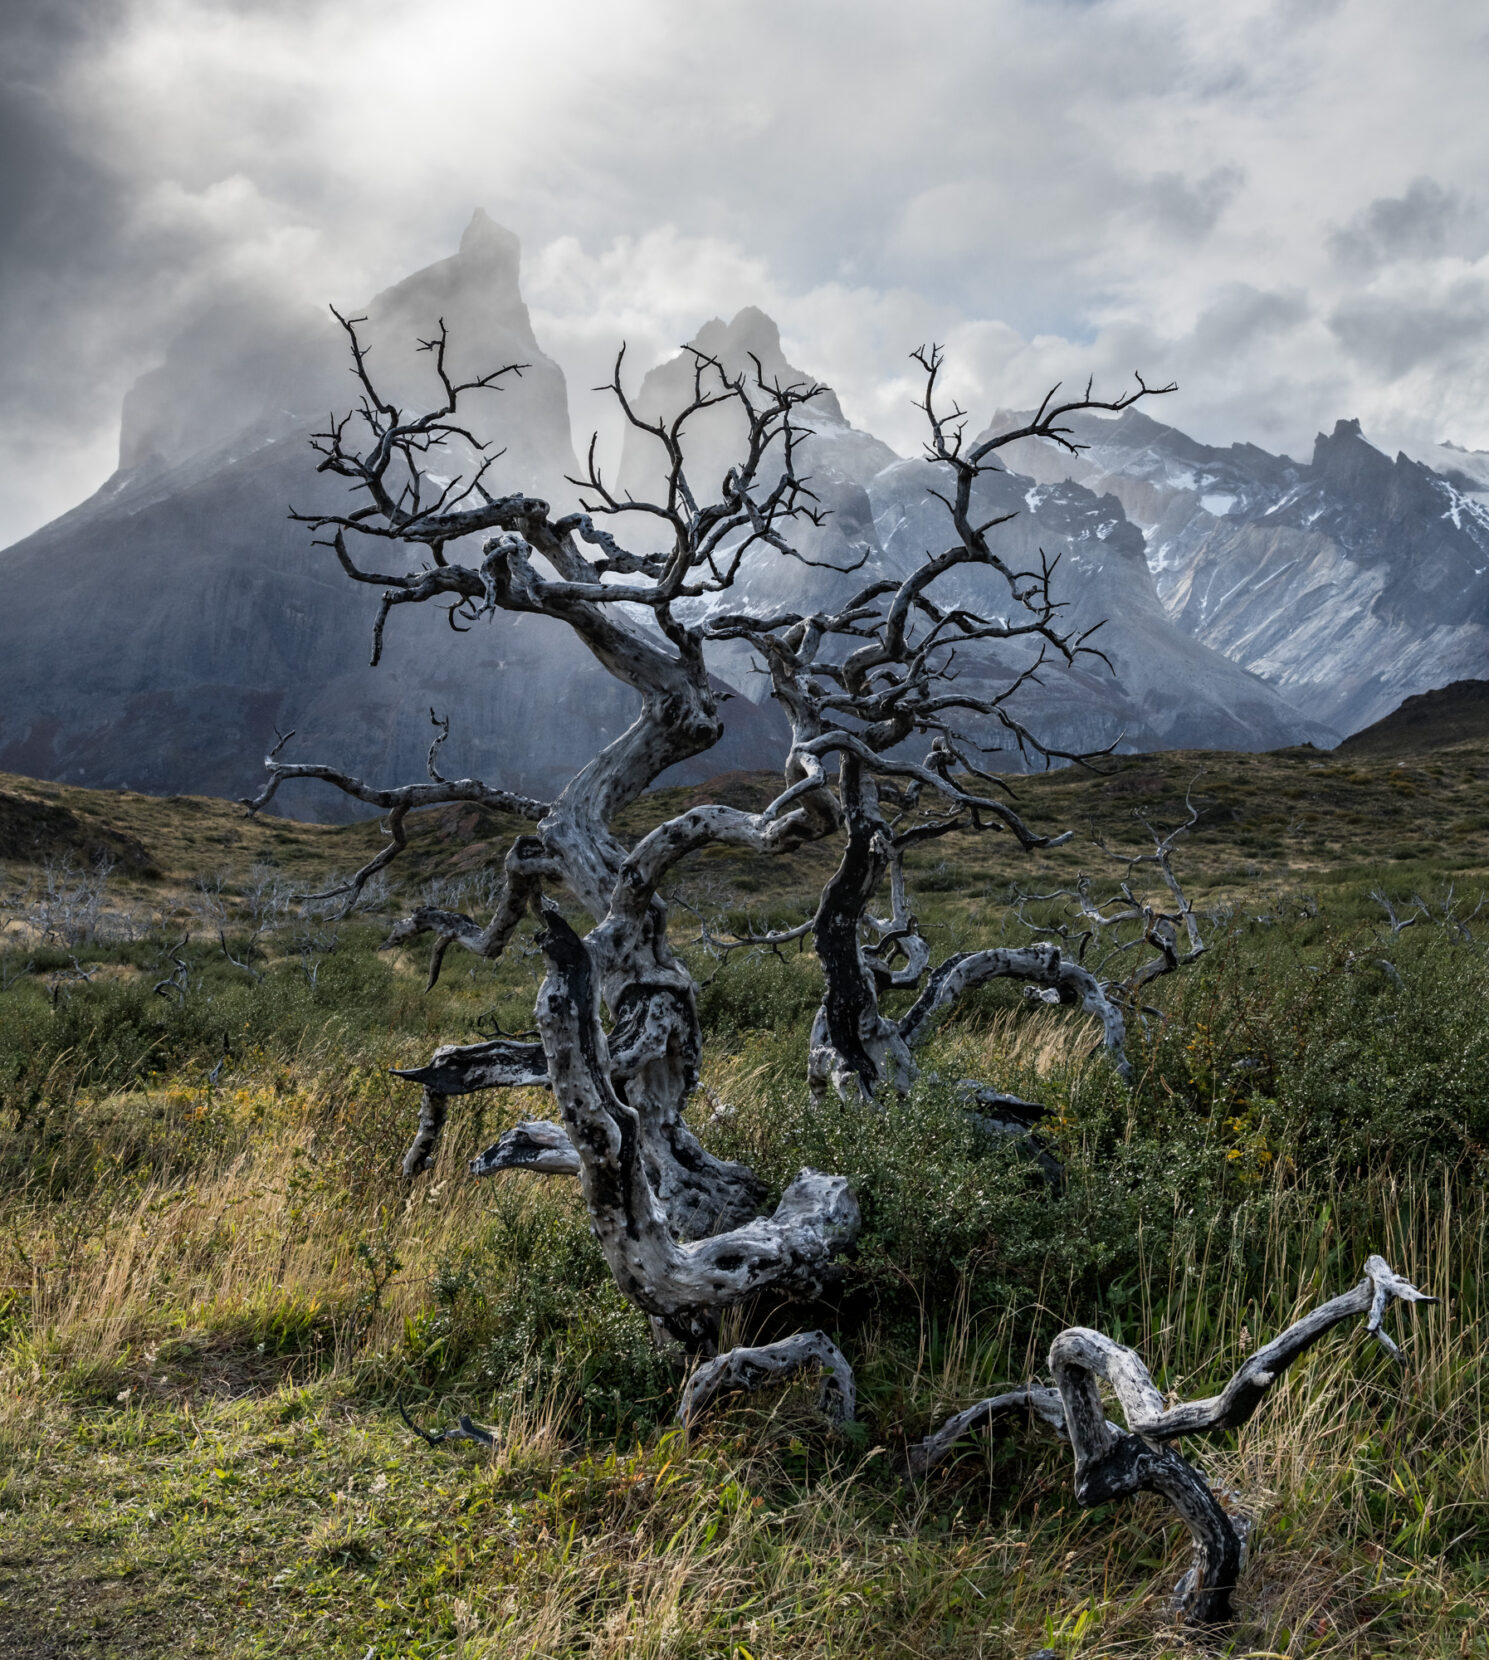 The twisted limbs of a burnt tree stand before snow-speckled, rocky mountains.